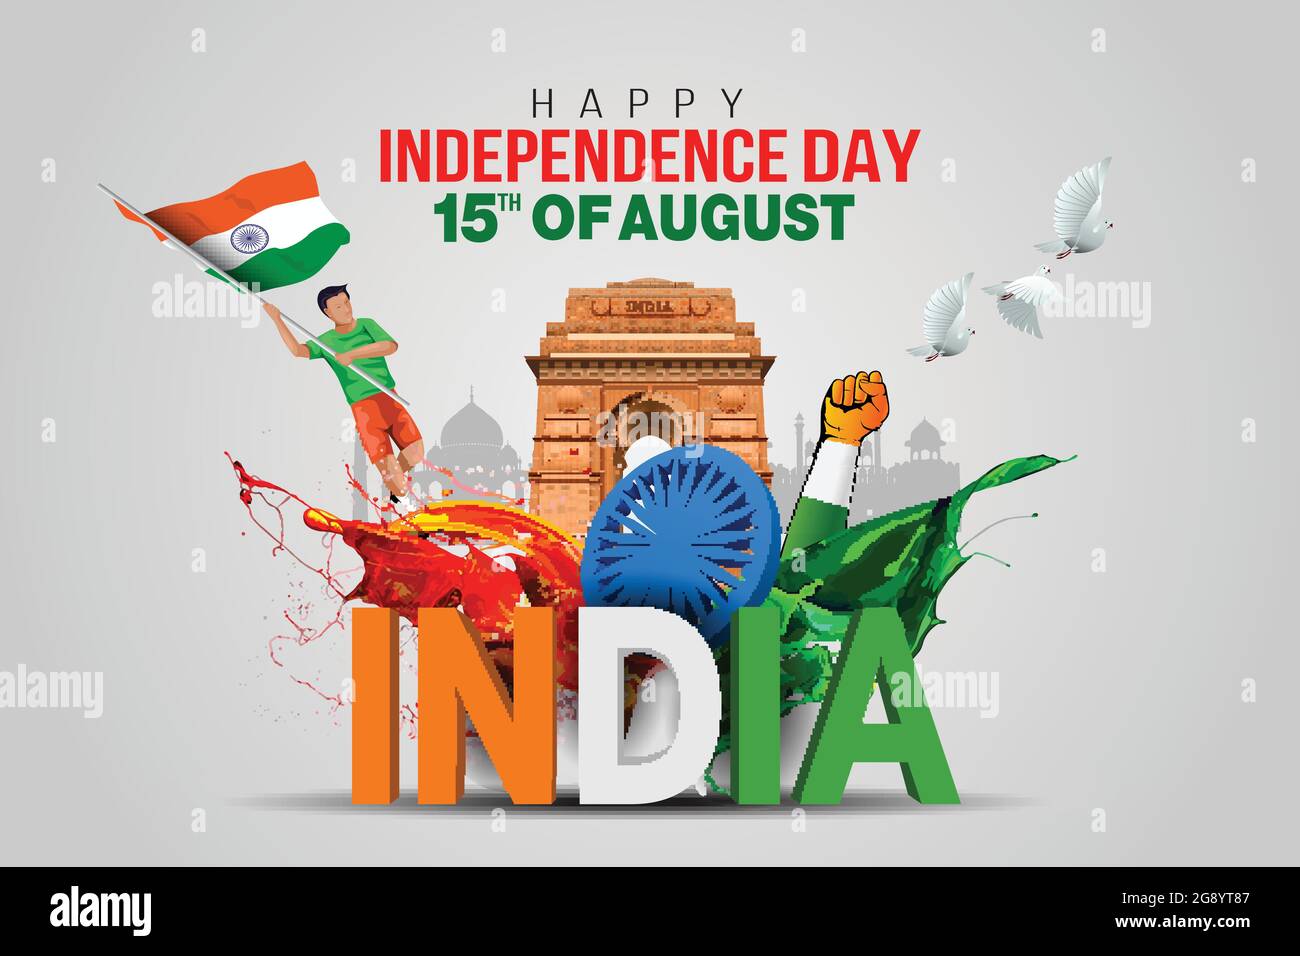 happy independence day India. vector illustration of Indian flag ...